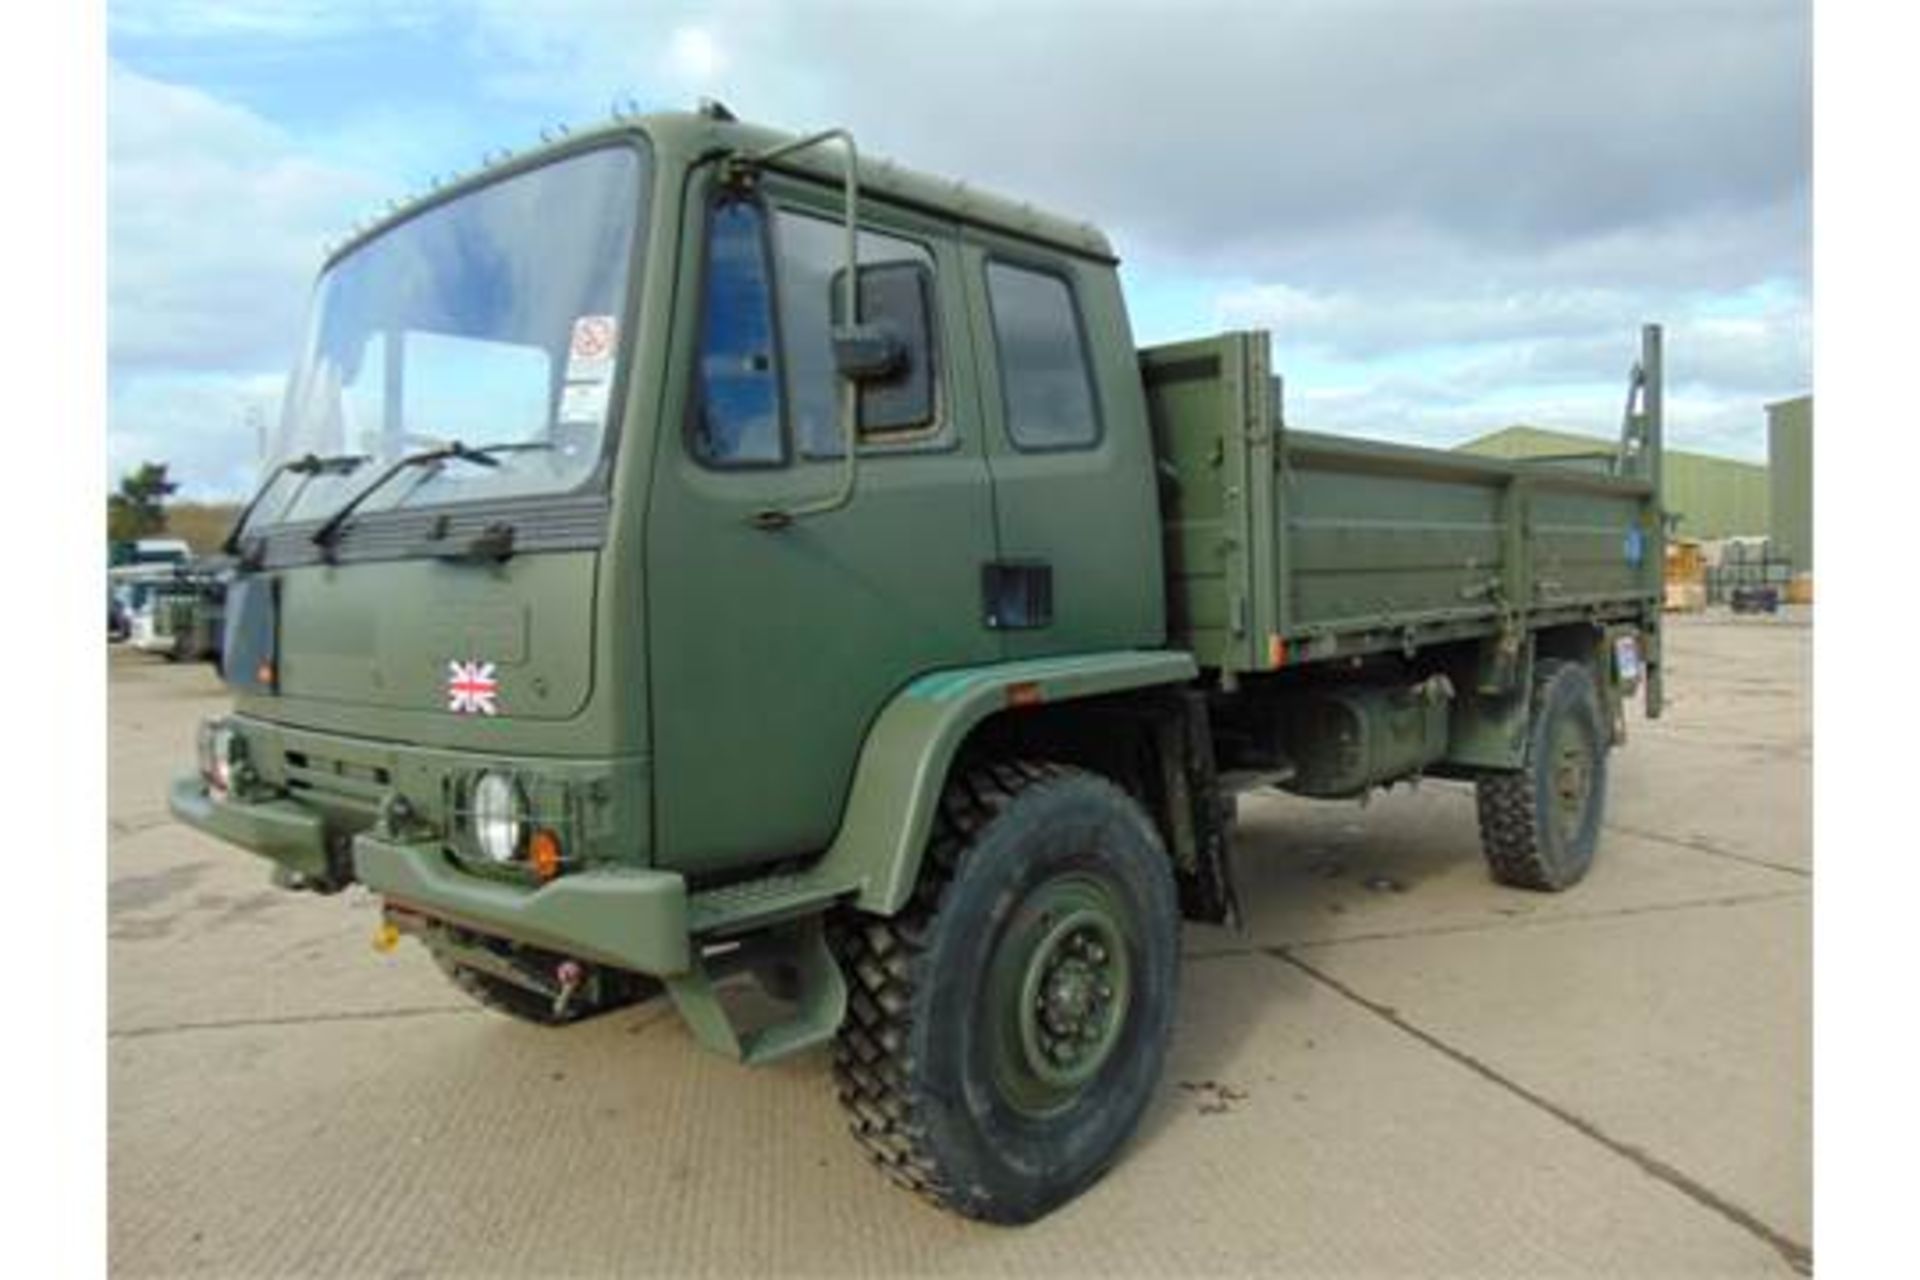 Leyland Daf 45/150 4 x 4 with Ratcliff 1000Kg Tail Lift - Image 3 of 19